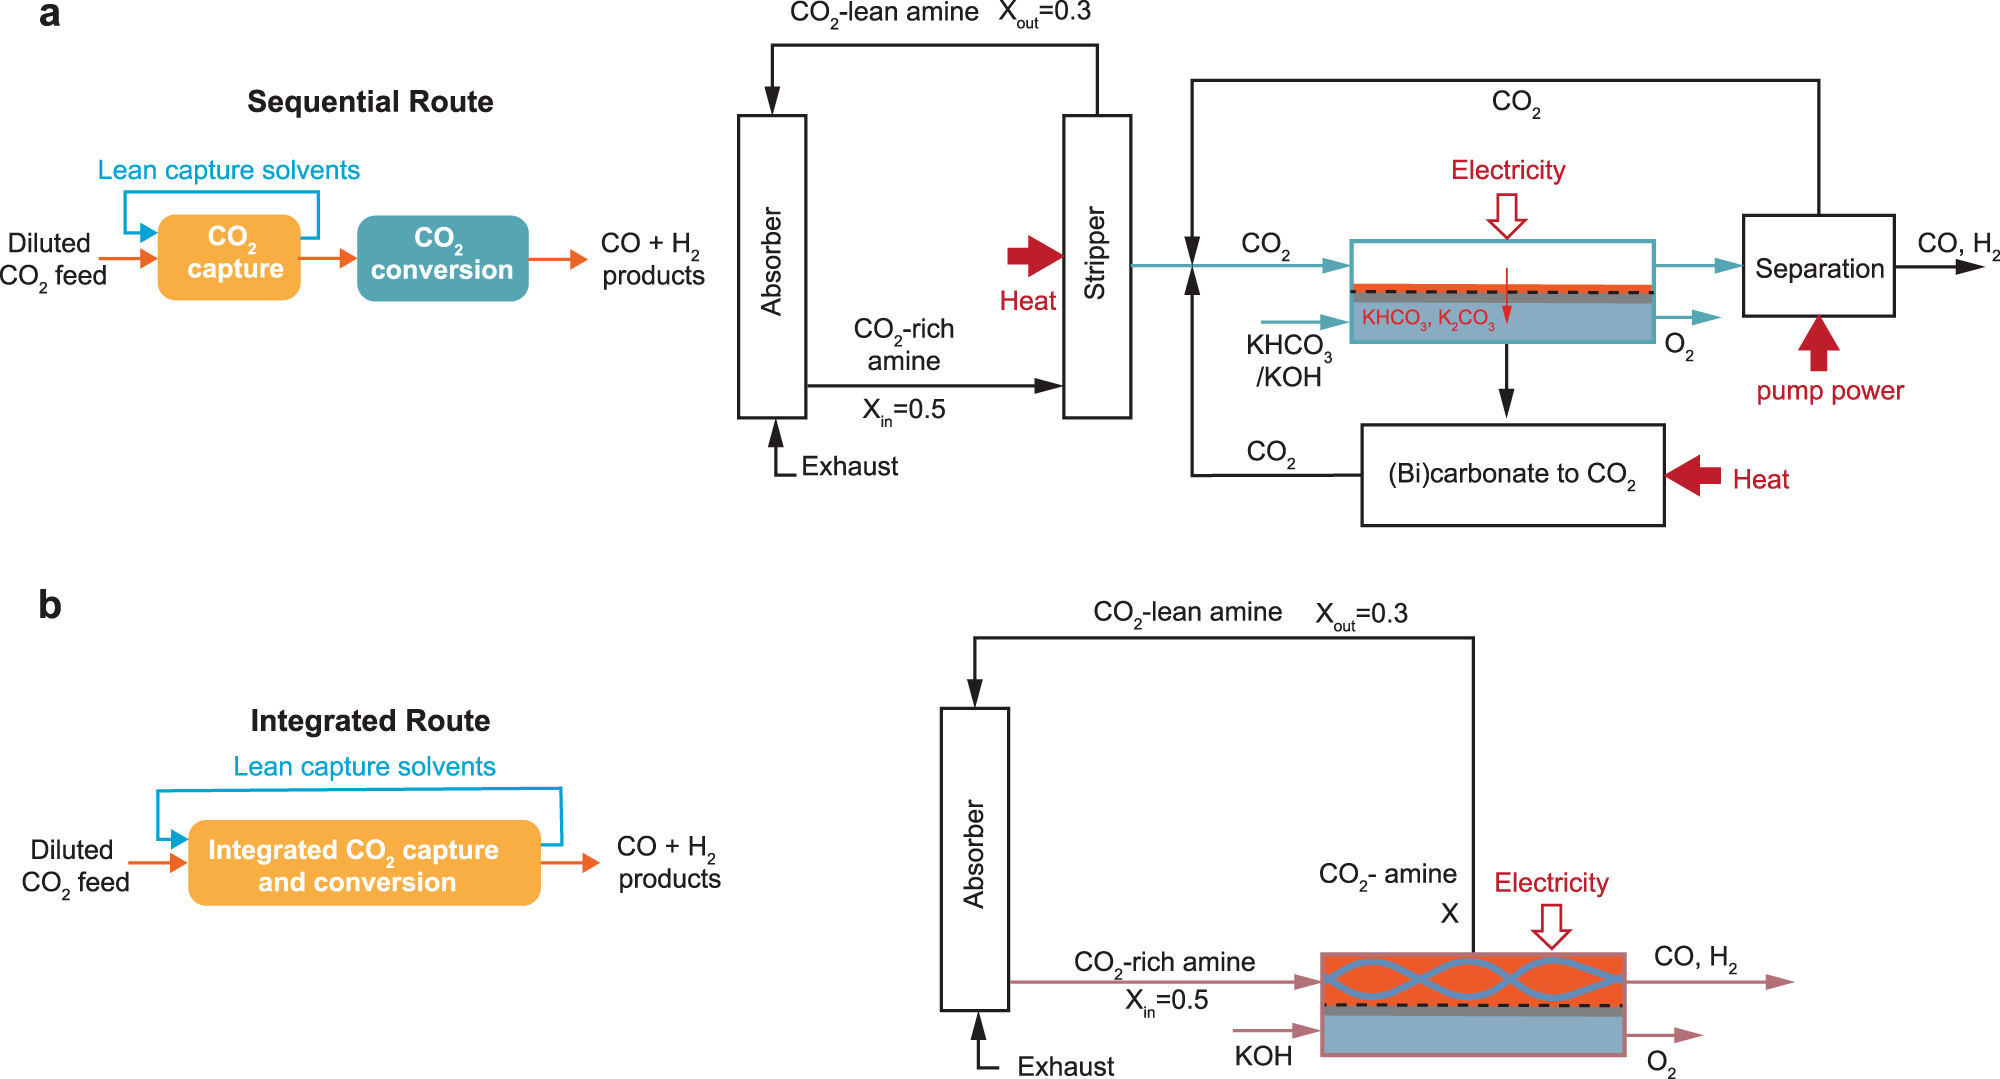 Energy comparison of sequential and integrated CO2 capture and